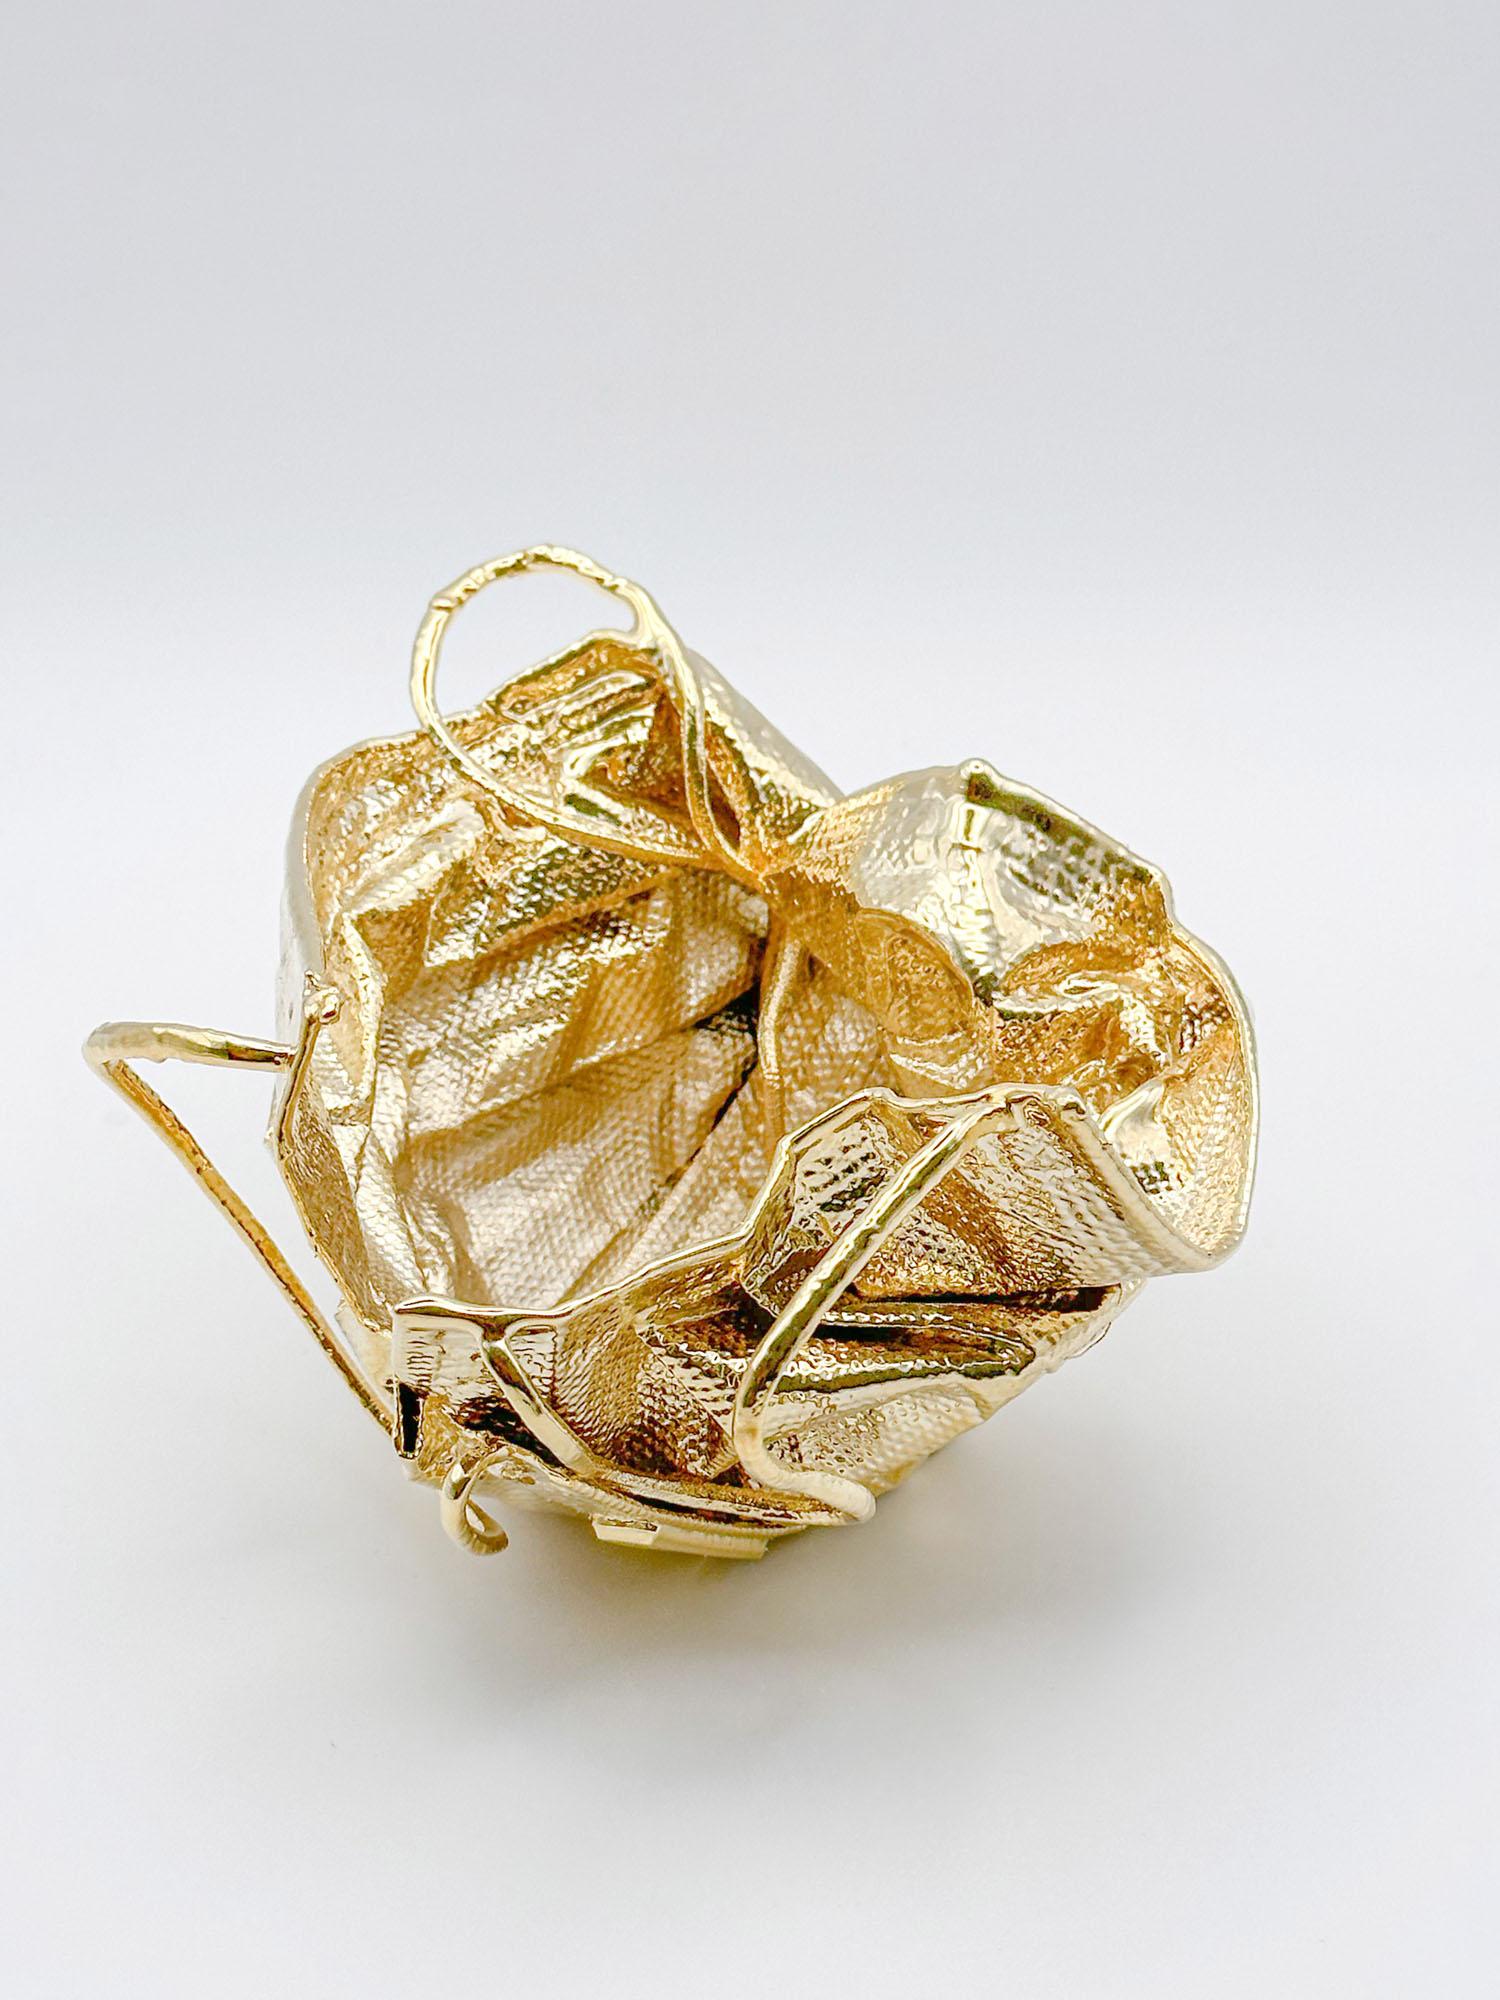 Galvanized Remask Act 009 Gold Art Object Made from Surgical Mask by Enrico Girotti For Sale